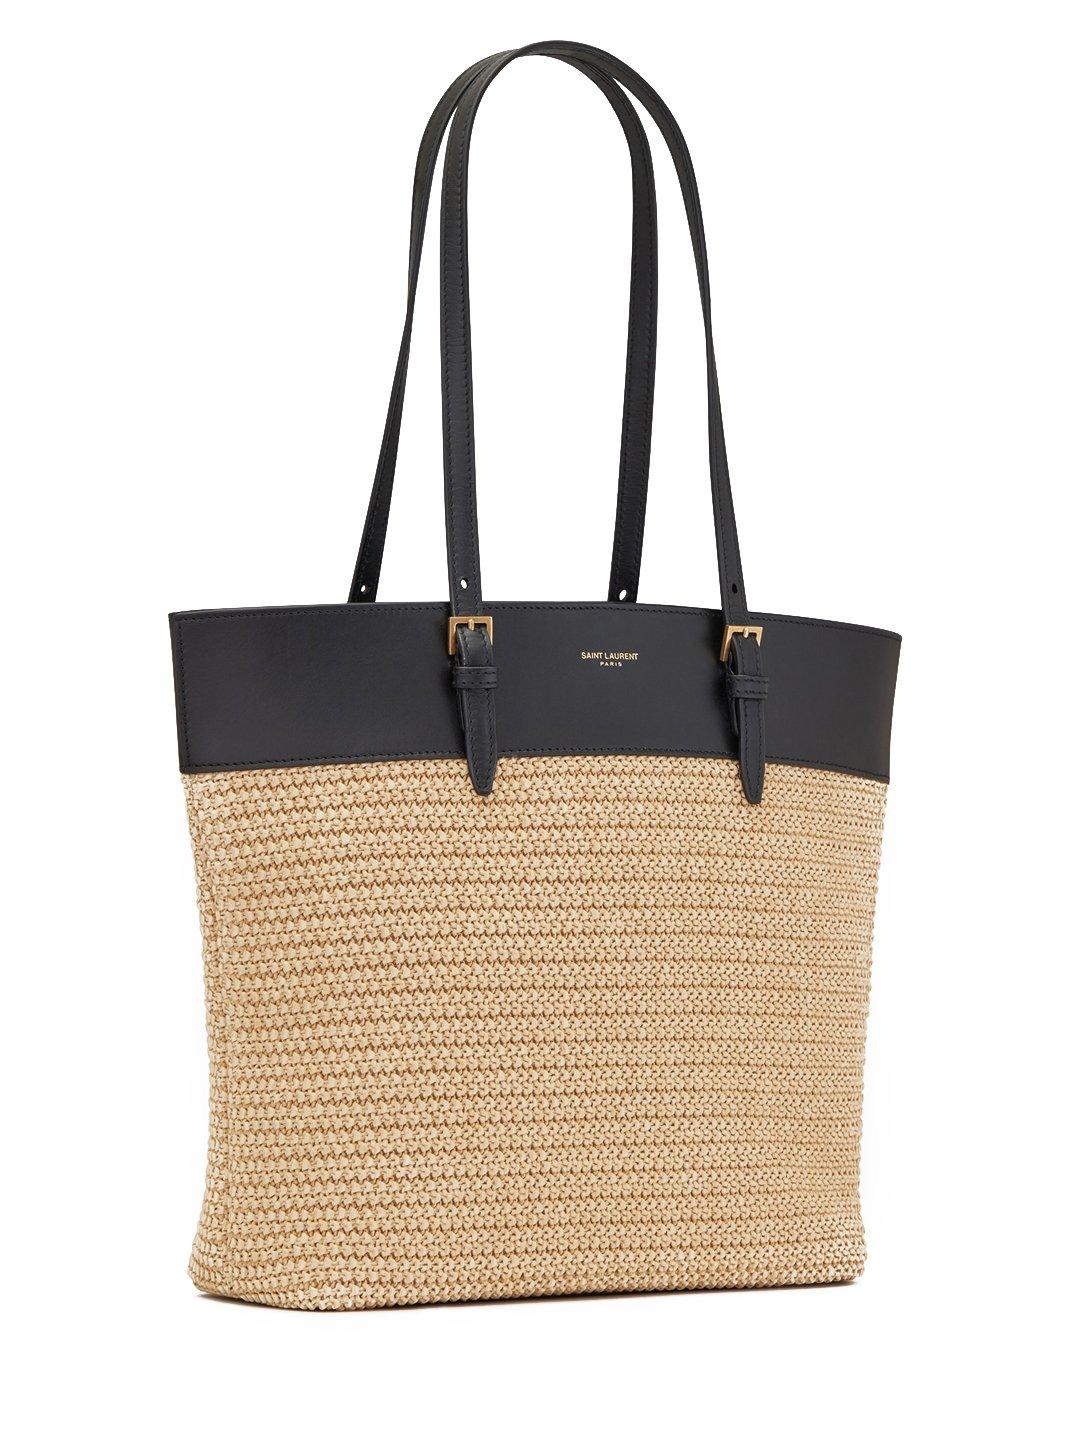 Straw tote bag with logo Saint Laurent